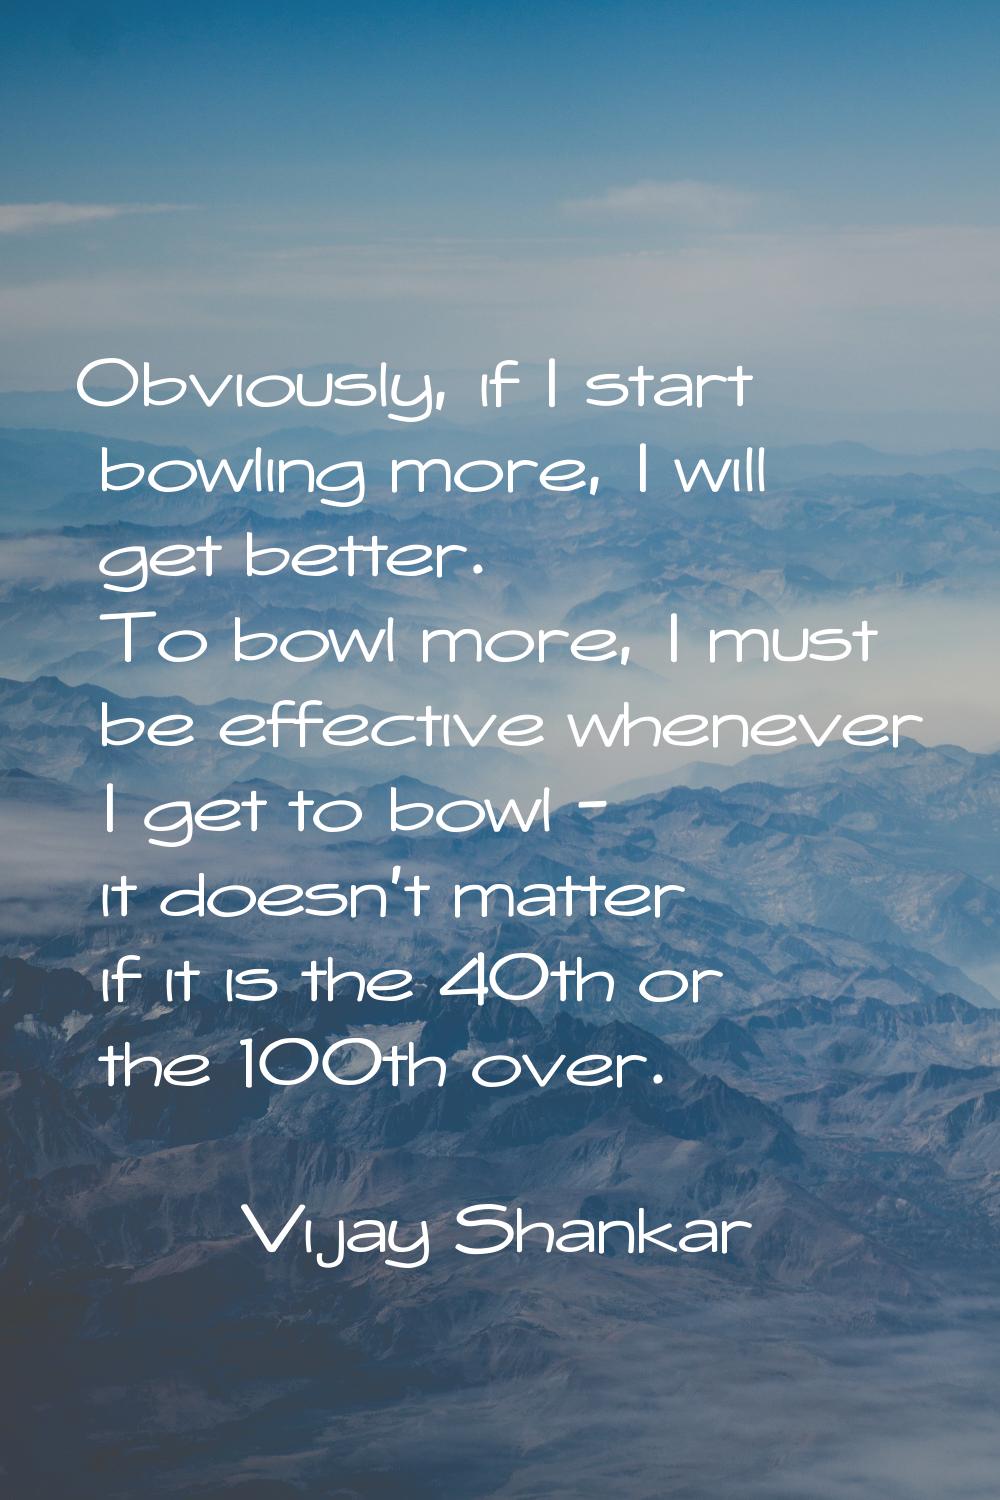 Obviously, if I start bowling more, I will get better. To bowl more, I must be effective whenever I